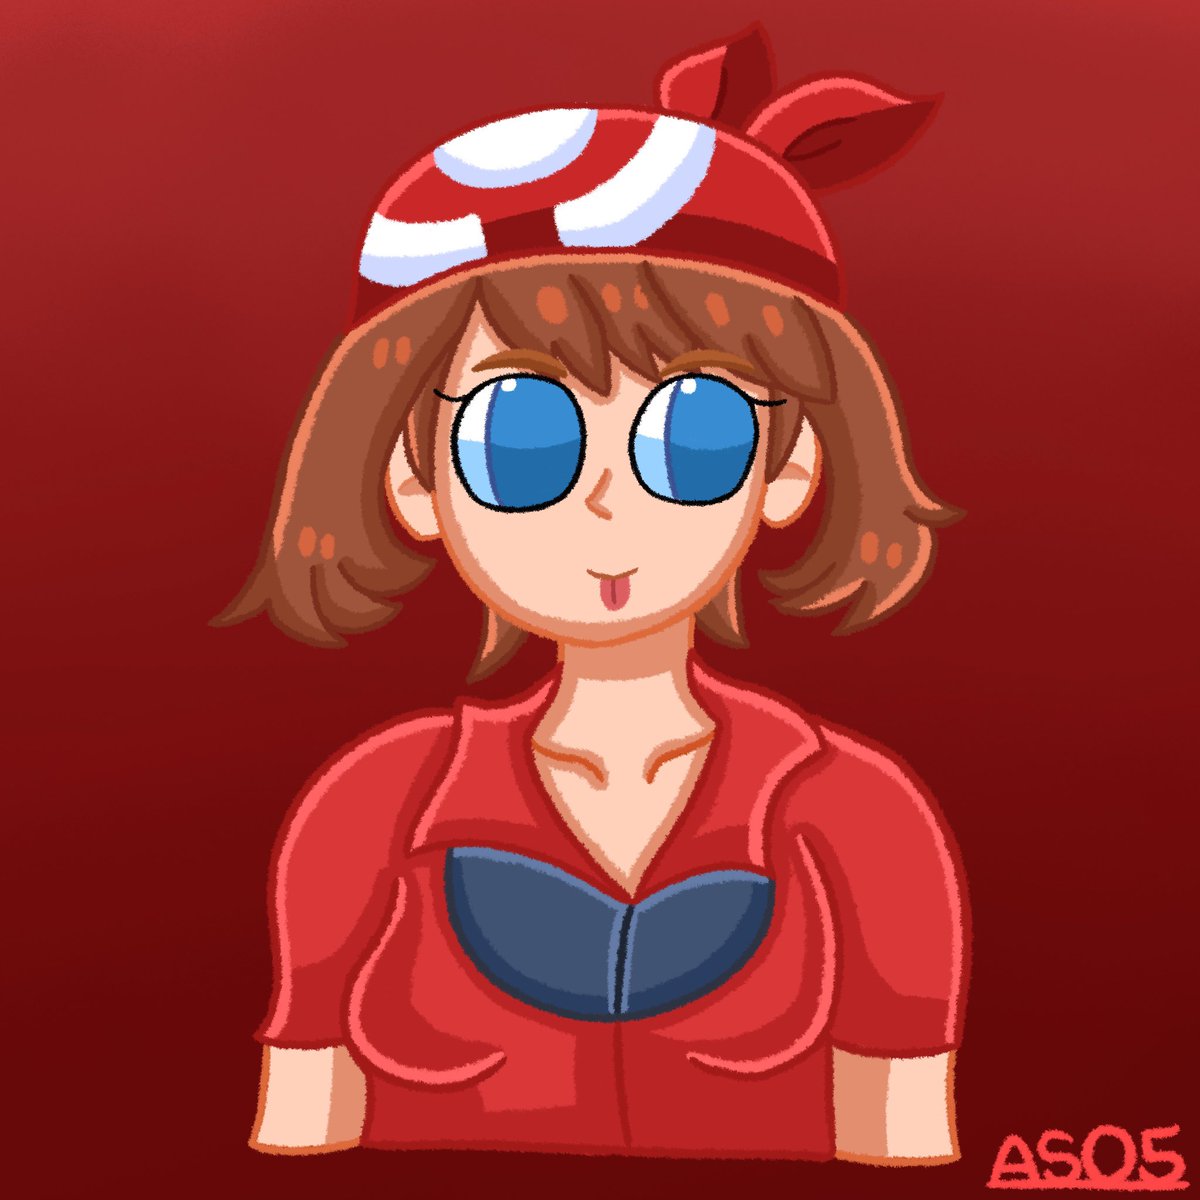 Here’s a fanart of May from Pokemon who I decided to draw even if May is almost over. 

She’s one of my favorite Pokegirls, so I had to give her a chance.

❤️/🔄s are welcomed!

#ArtistOnTwitter #AS05 #May #Pokemon #DigitalArt